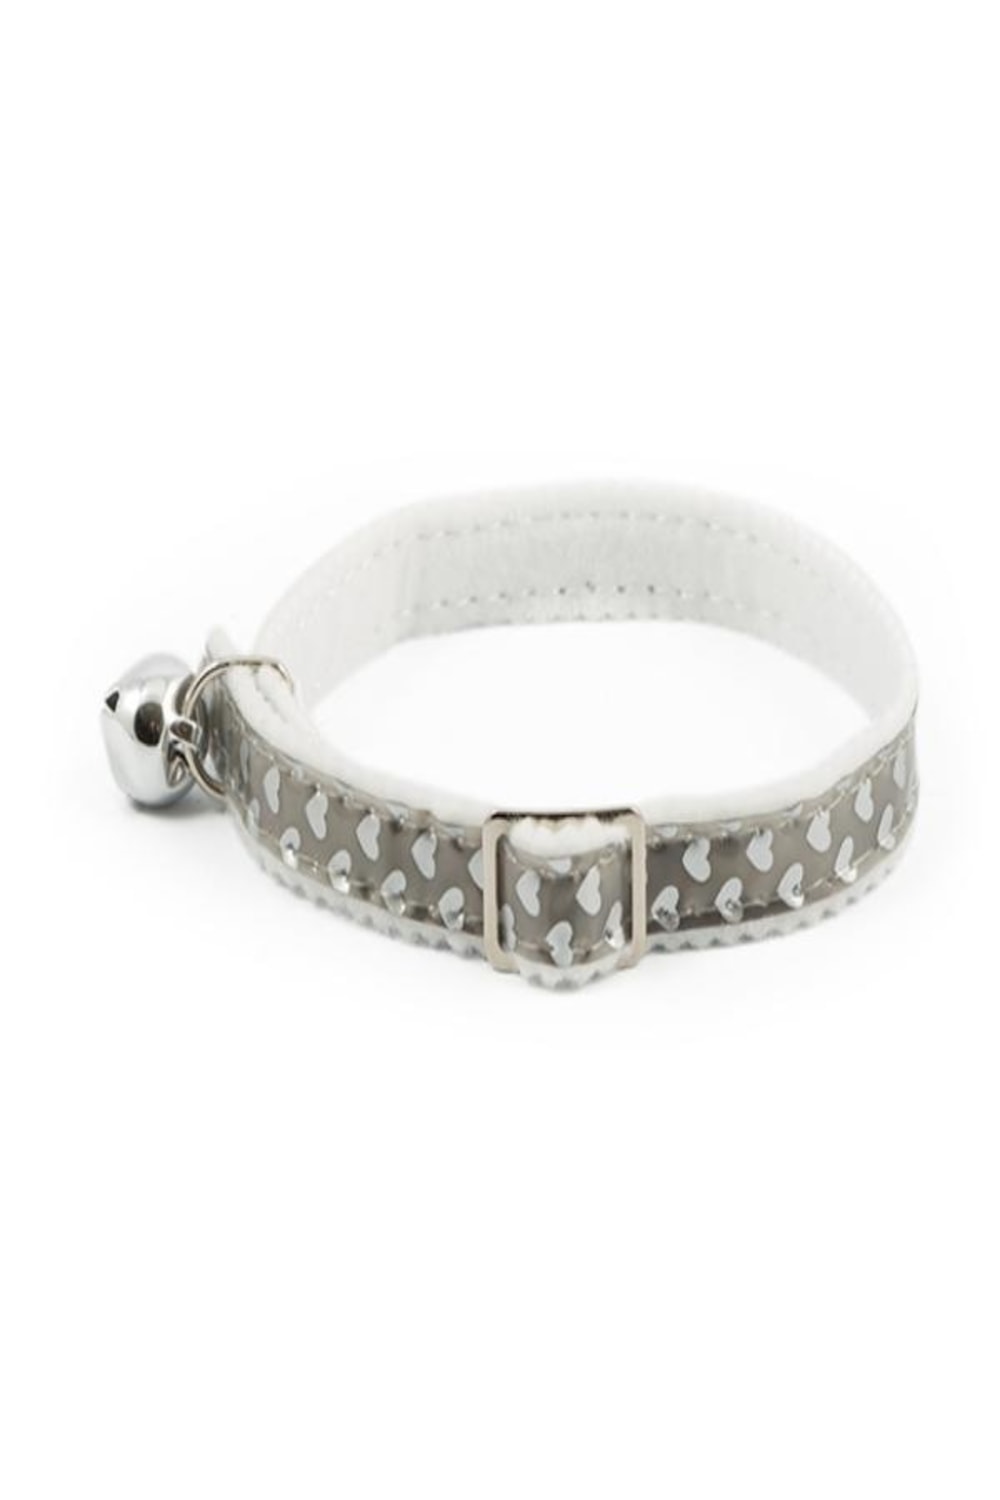 Ancol Gloss Heart Cat Collar (Silver) (One Size)